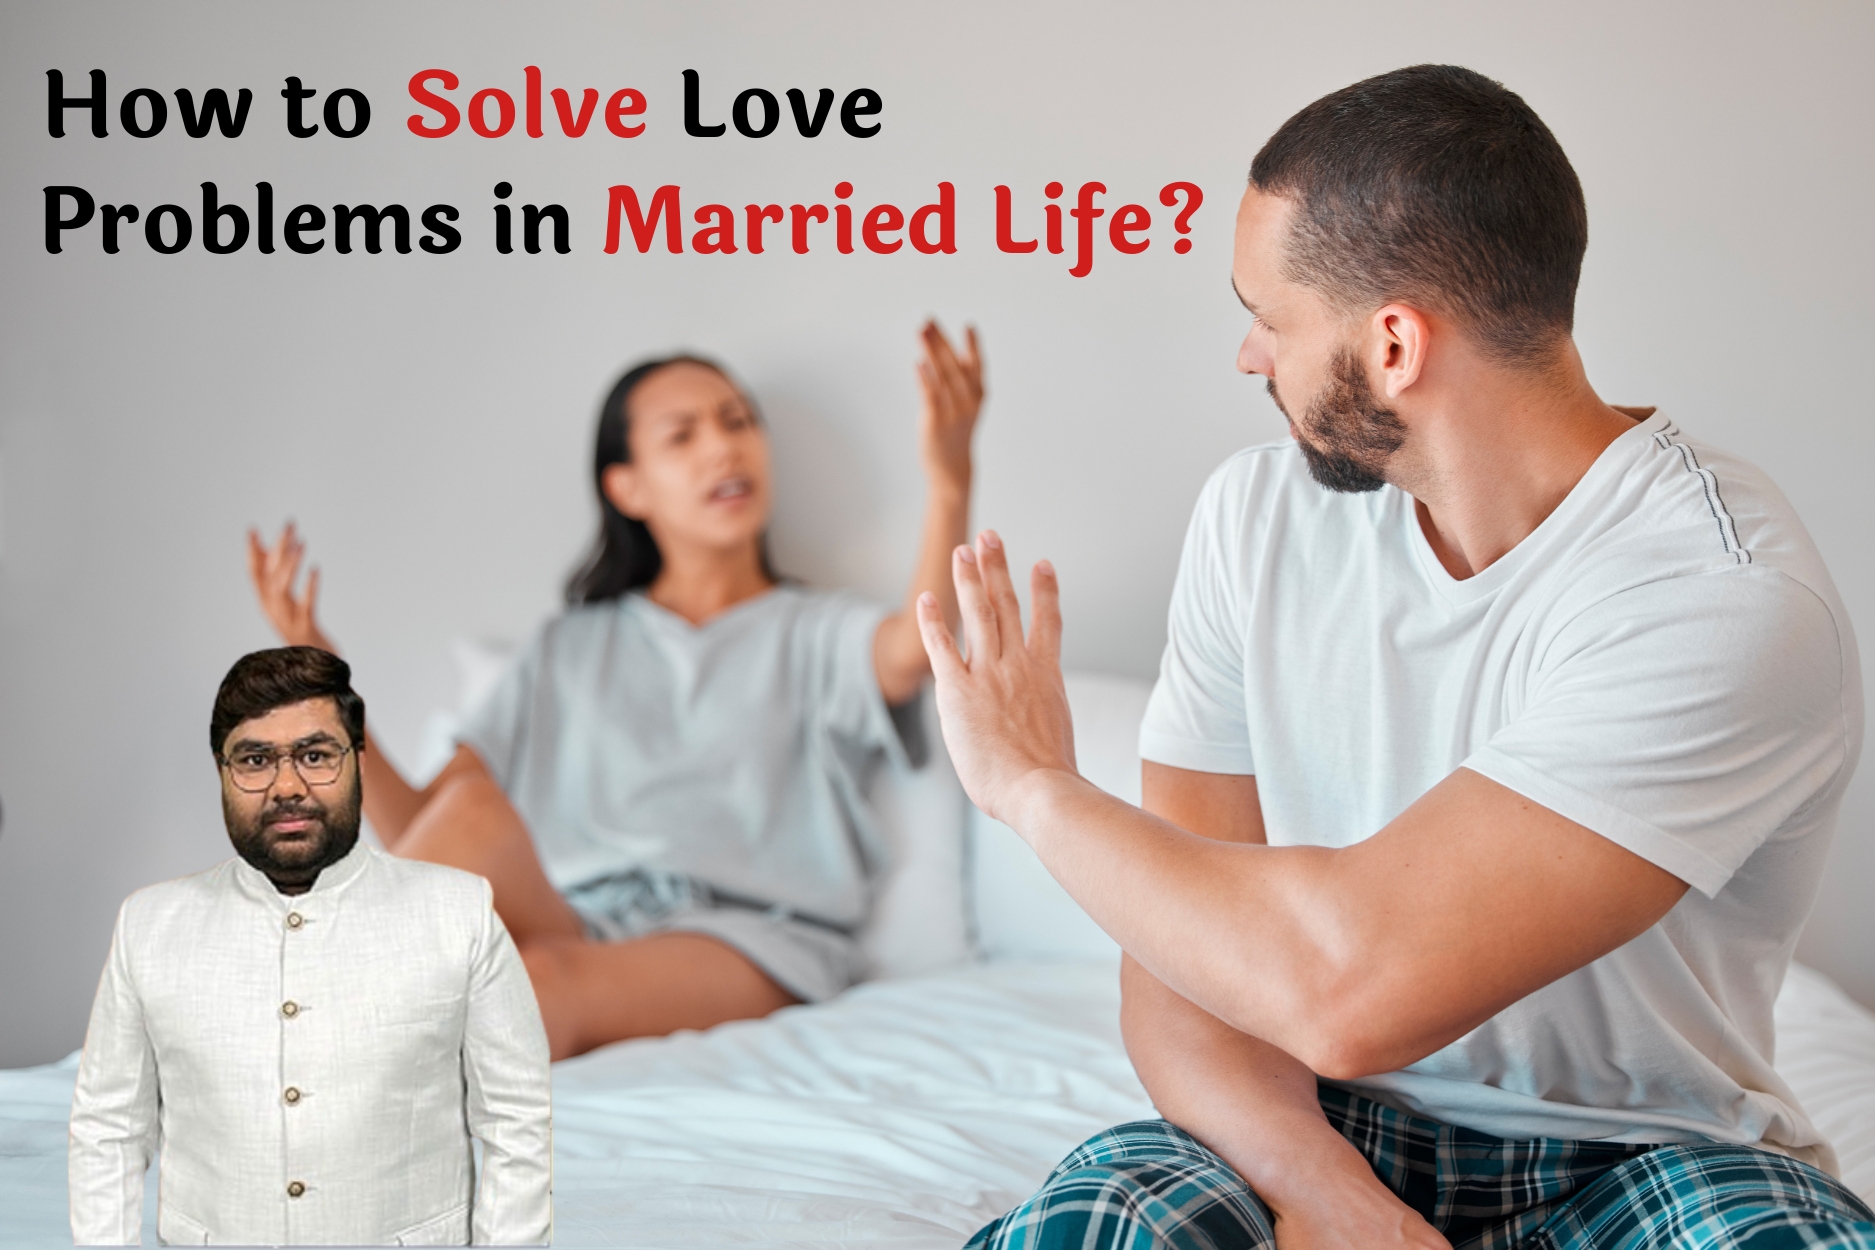 How to Solve Love Problems in Married Life?